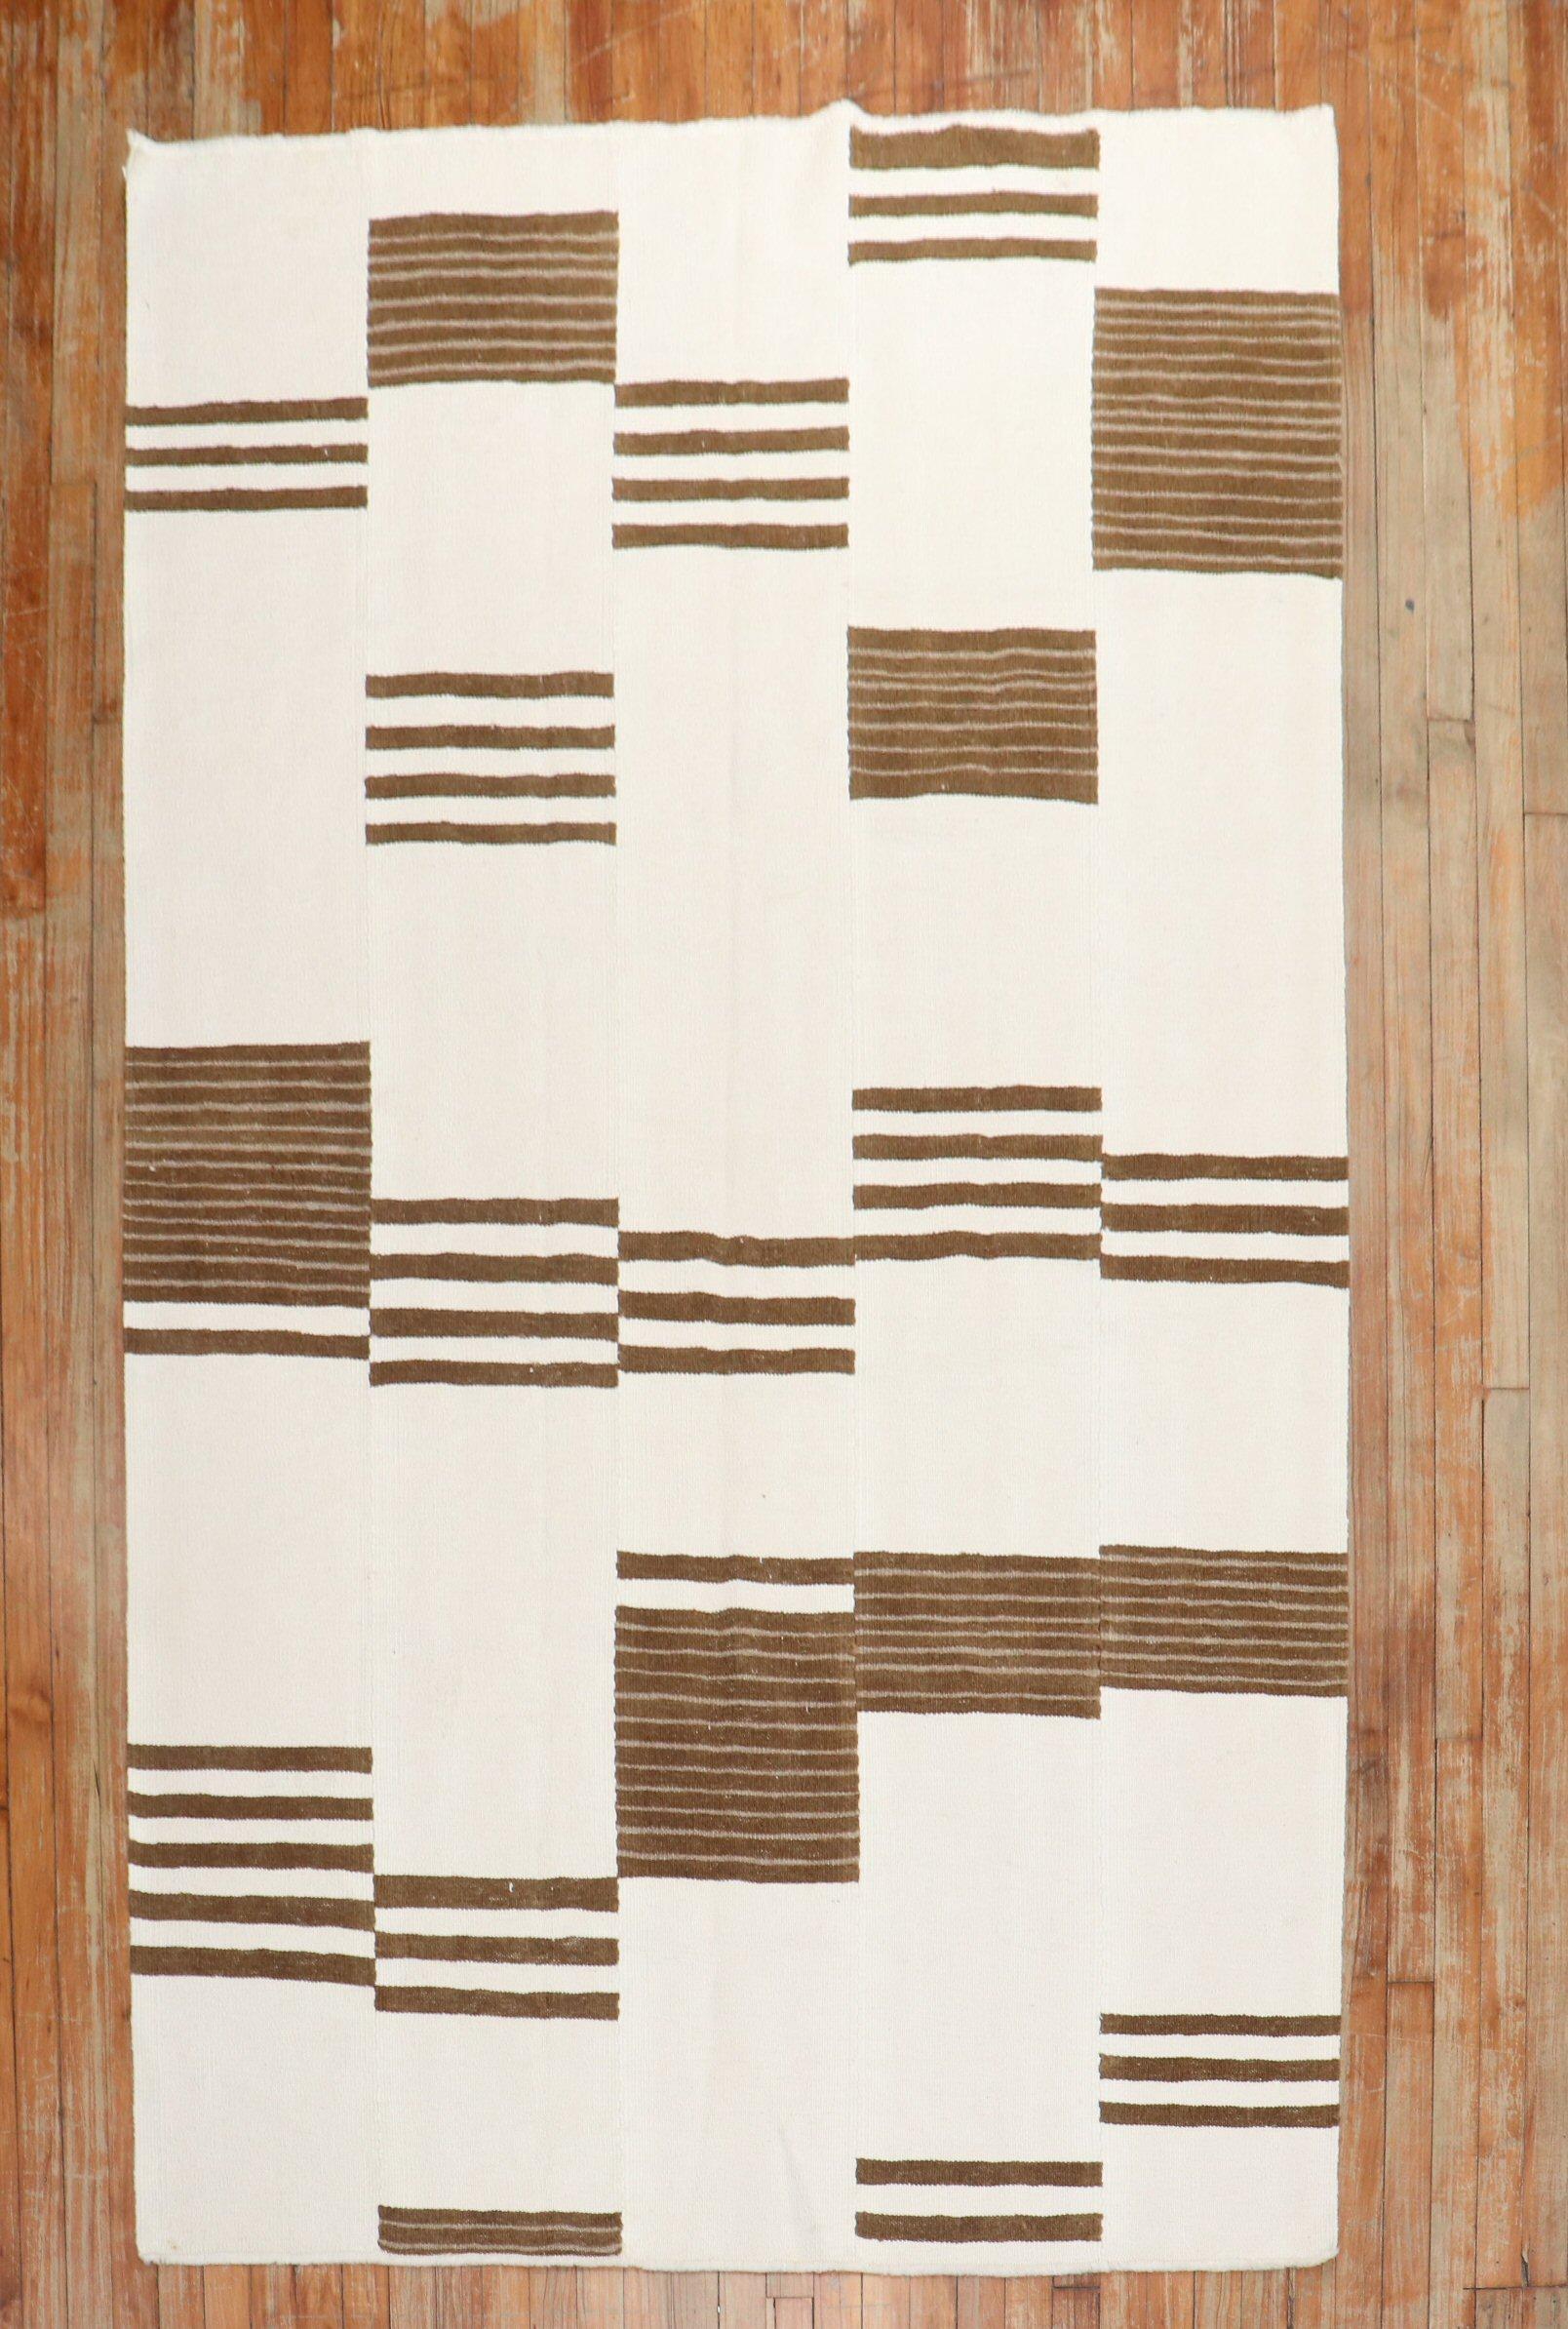 Intermediate-size Modern Turkish Kilim in ivory and brown made from recycled cotton and goat hair material giving it an old-world, vintage feel.

Measures: 4'10'' x 8'1''.